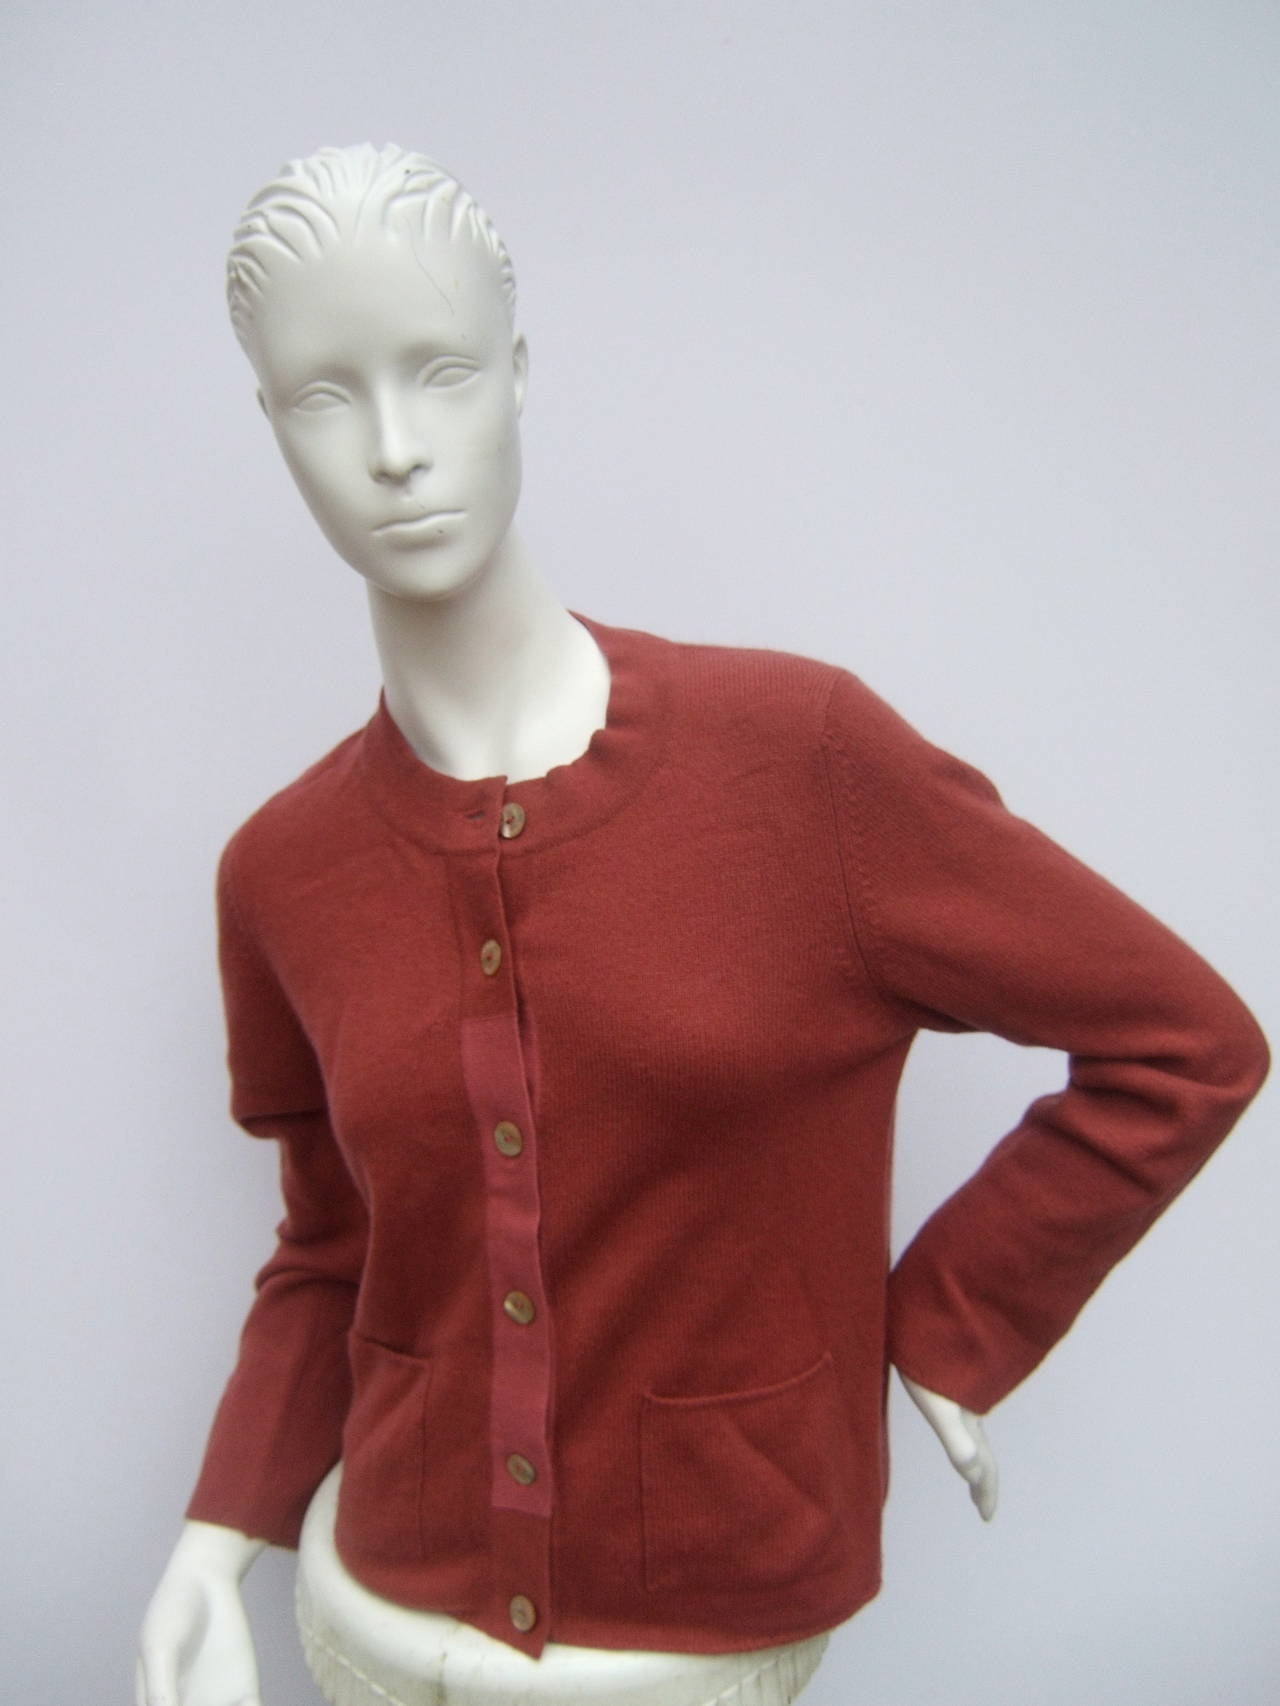 ***RESERVED SALE PENDING FOR ALEXIS ASCHER***
 
Chanel Cashmere berry cardigan with Chanel mother of pearl buttons
The cashmere cardigan is berry color with a section in the center that is mauve blush pink. Designed with six mother of pearl